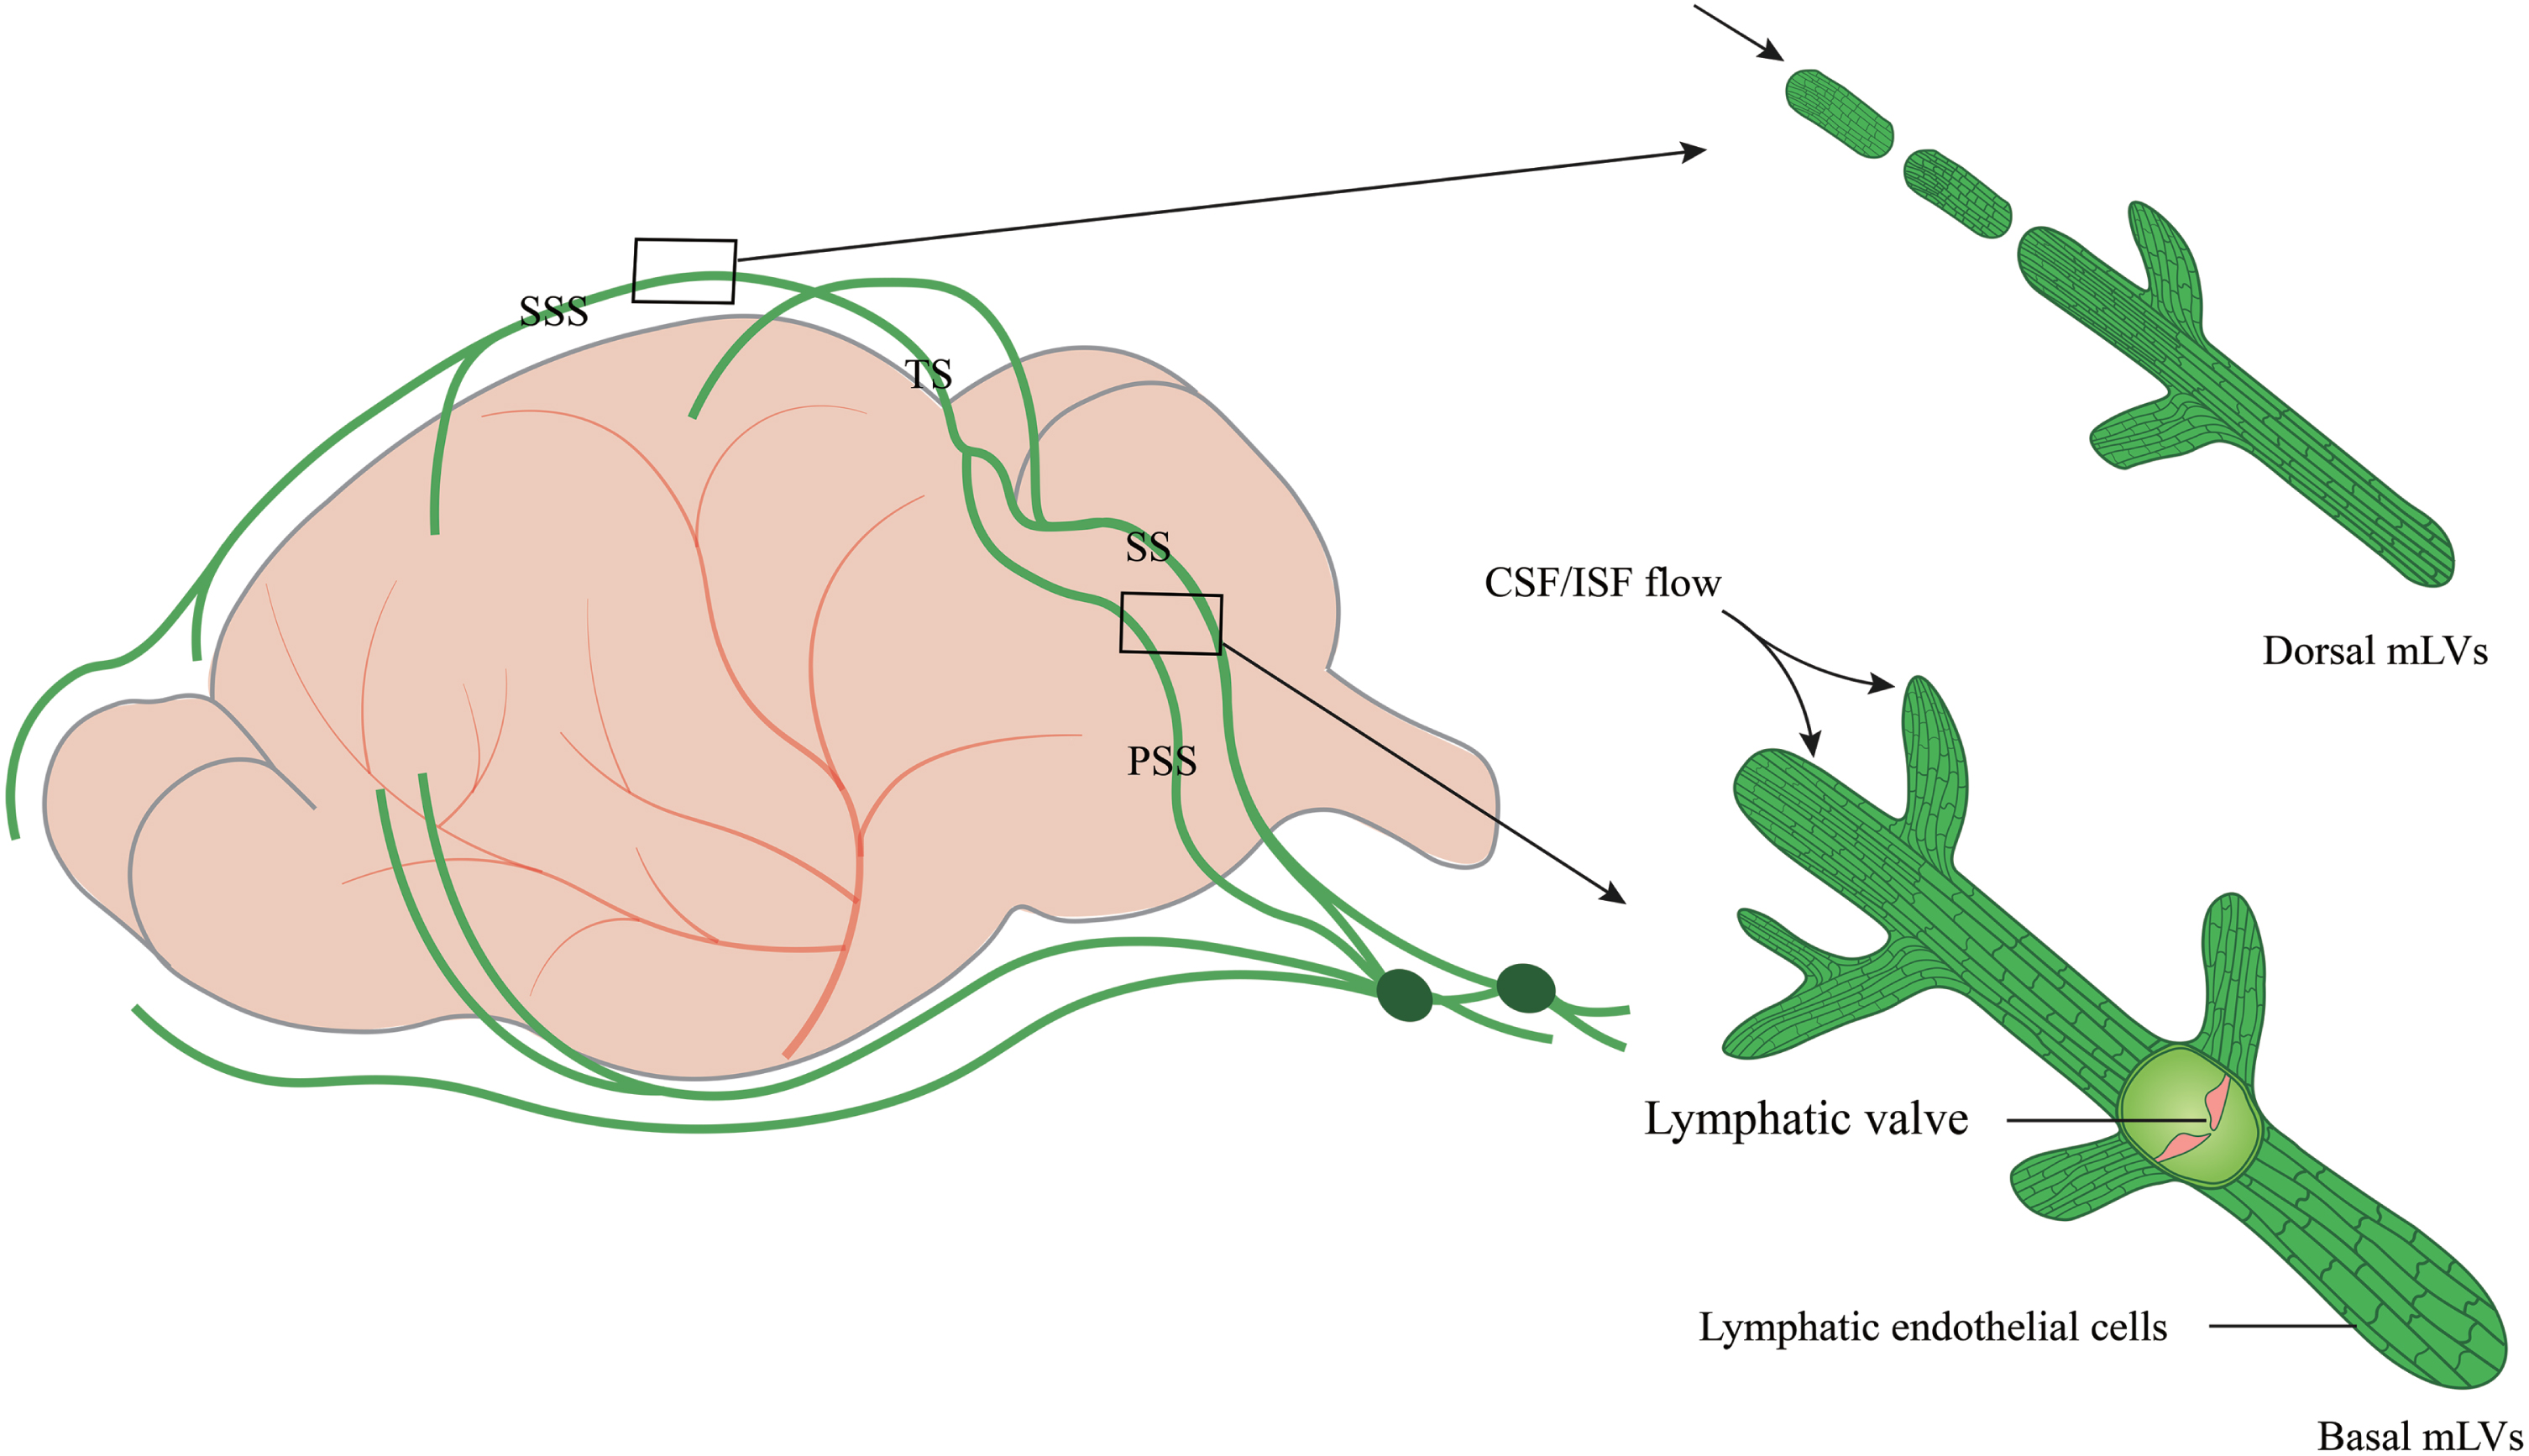 The structure and location of dorsal and basal mLVs. Schematic images of dorsal and basal mLVs tracking along the dural sinus with differences in structures, branches, lumen diameter, and lymphatic valves. Dorsal mLVs travel along the superior sagittal sinus (SSS) and transverse sinus (TS). The lumen is primarily a discontinuous vascular structure, with a small diameter and no valves. Basal mLVs are located near the subarachnoid space (SAS) and run along the petrosal sinus (PSS) and sigmoid sinus (SS). The lumen is primarily a continuous vascular structure with a large diameter and lymphatic valves.